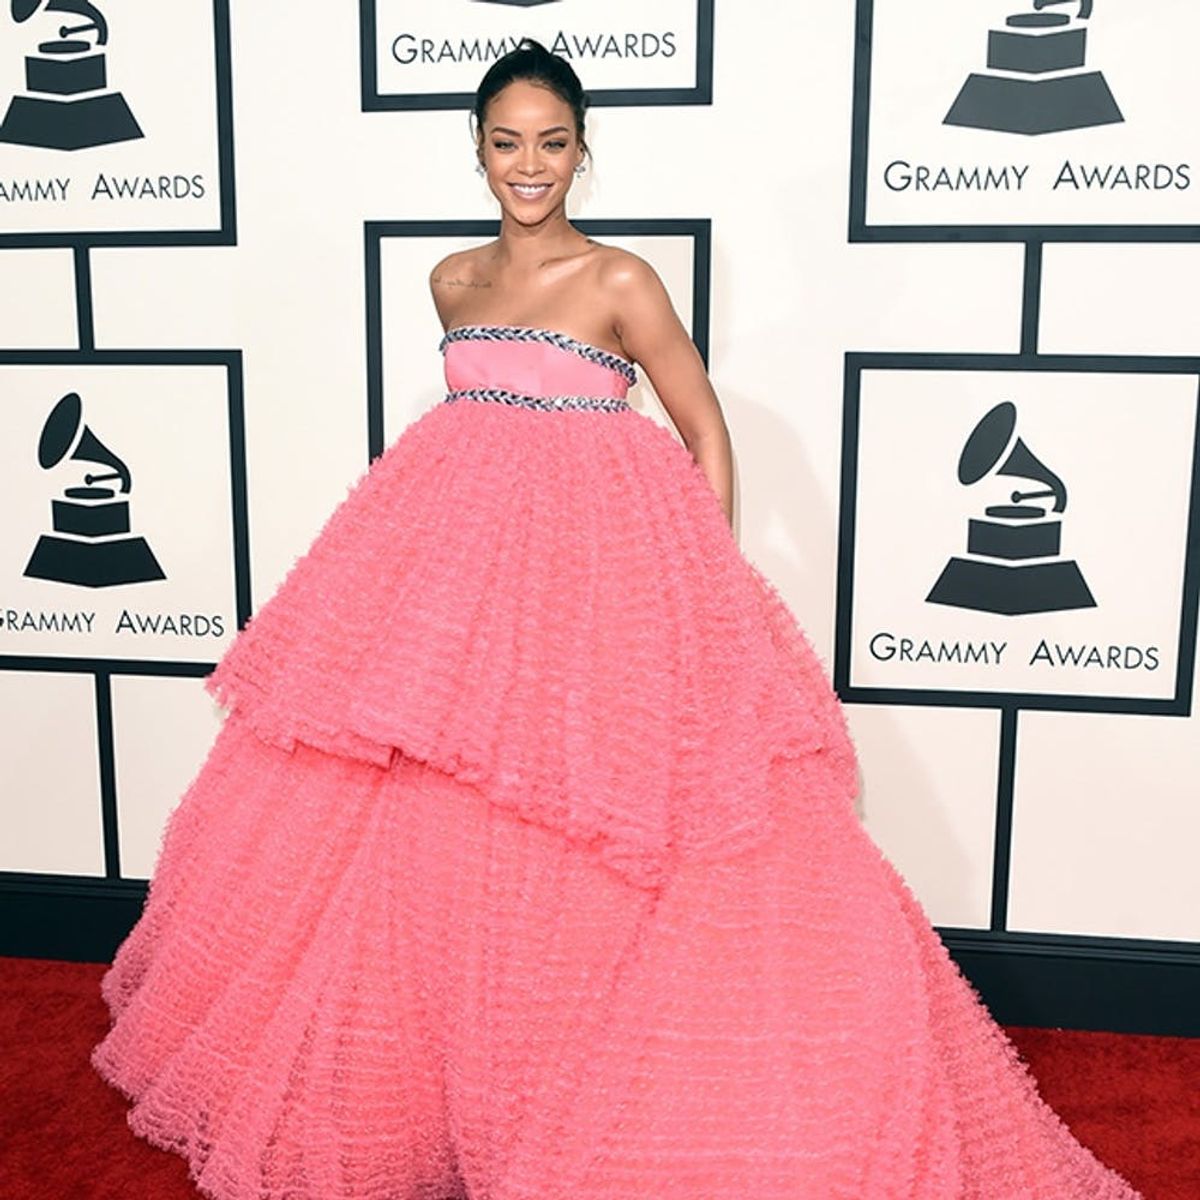 Shop These Look-alike Versions of the 15 Best Grammys Looks